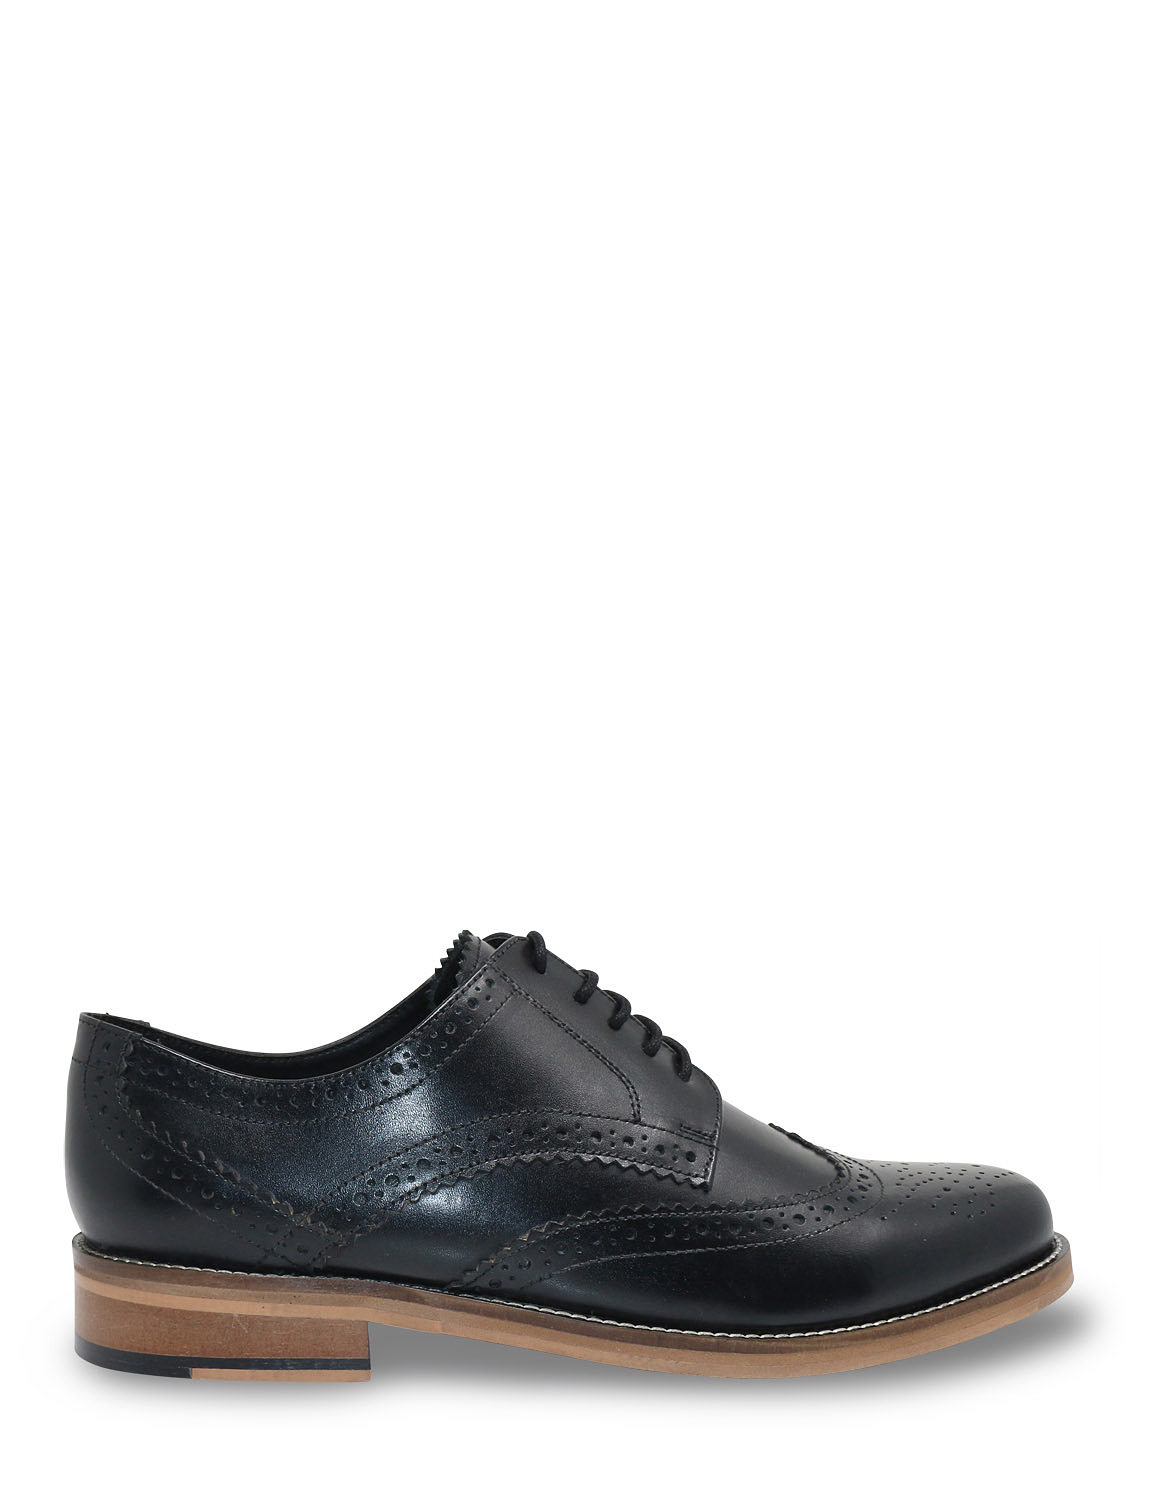 Pegasus Wide Fit Leather Brogue | Chums